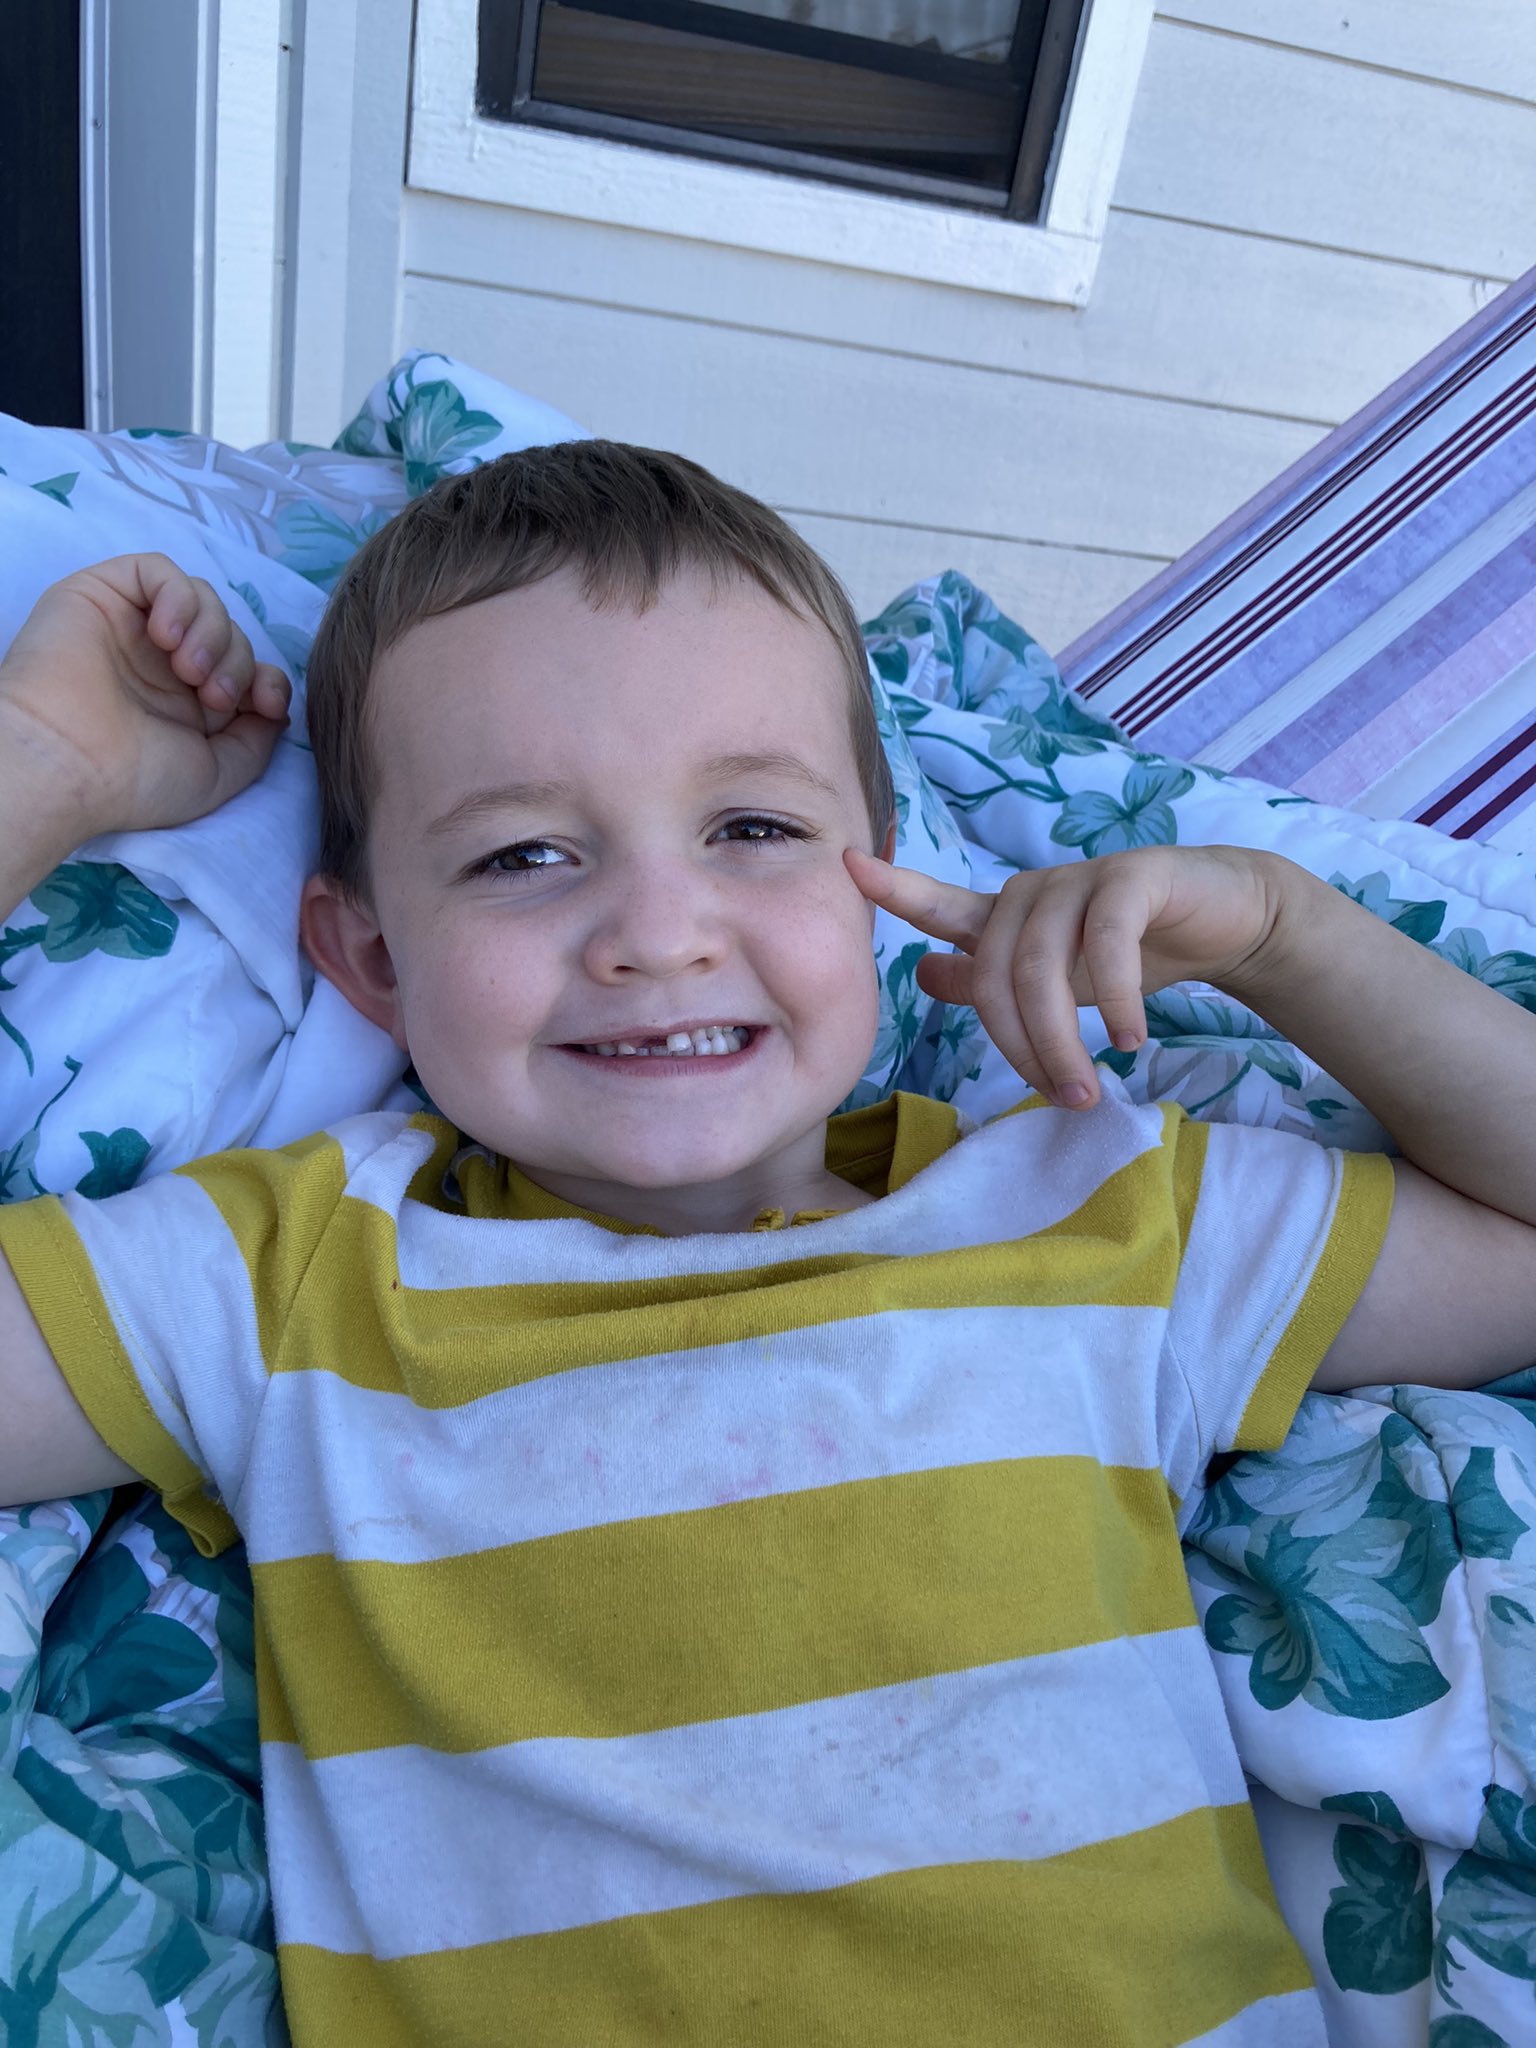 Julian laying outside in the hammock on his blanket with a gap tooth smile.